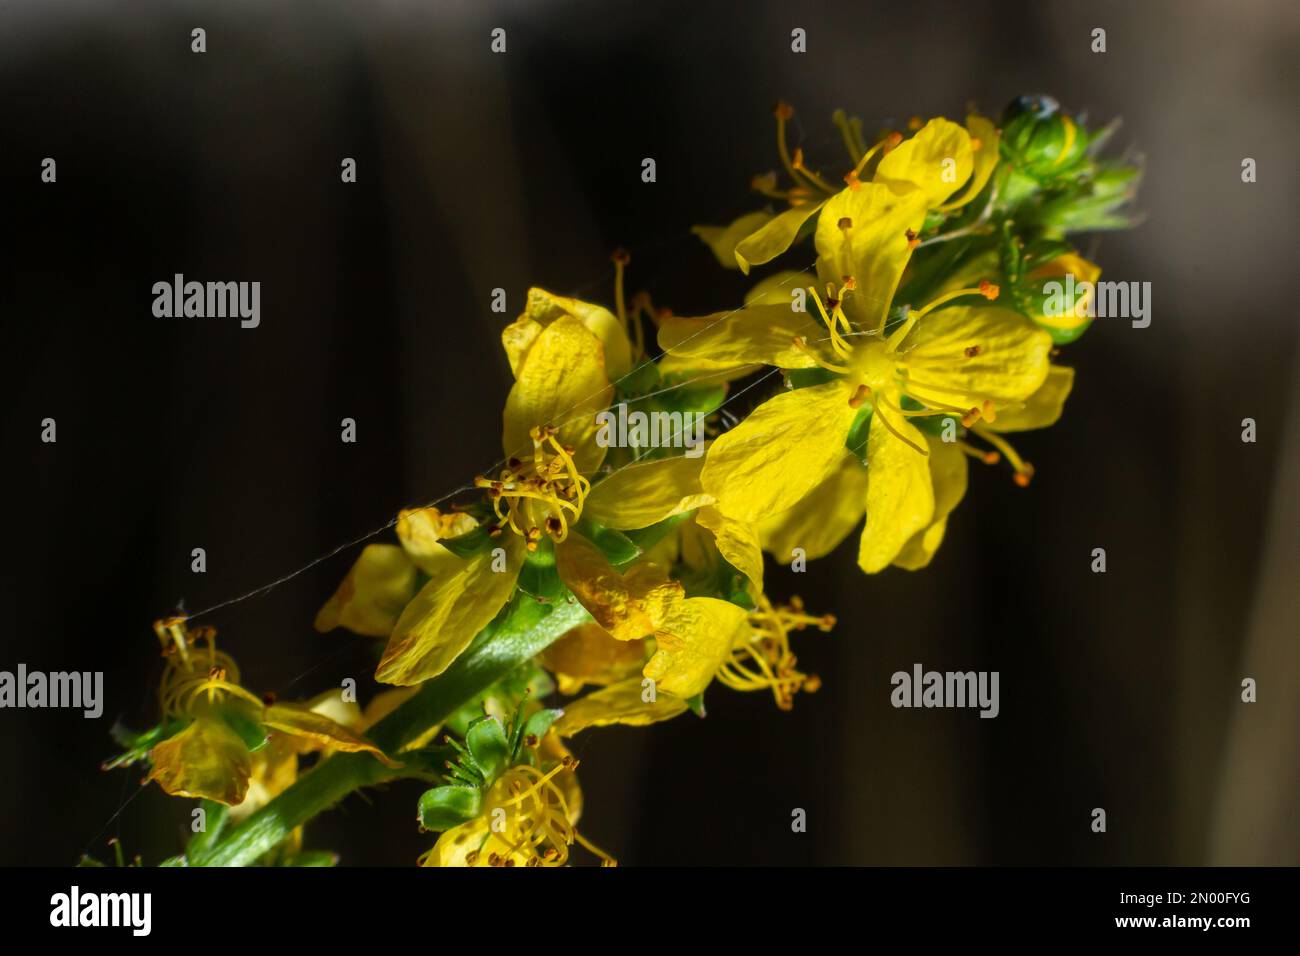 Agrimonia, Eupatoria, is an important medicinal plant with yellow flowers. It is a beautiful perennial plant and is also used in medicine. Stock Photo